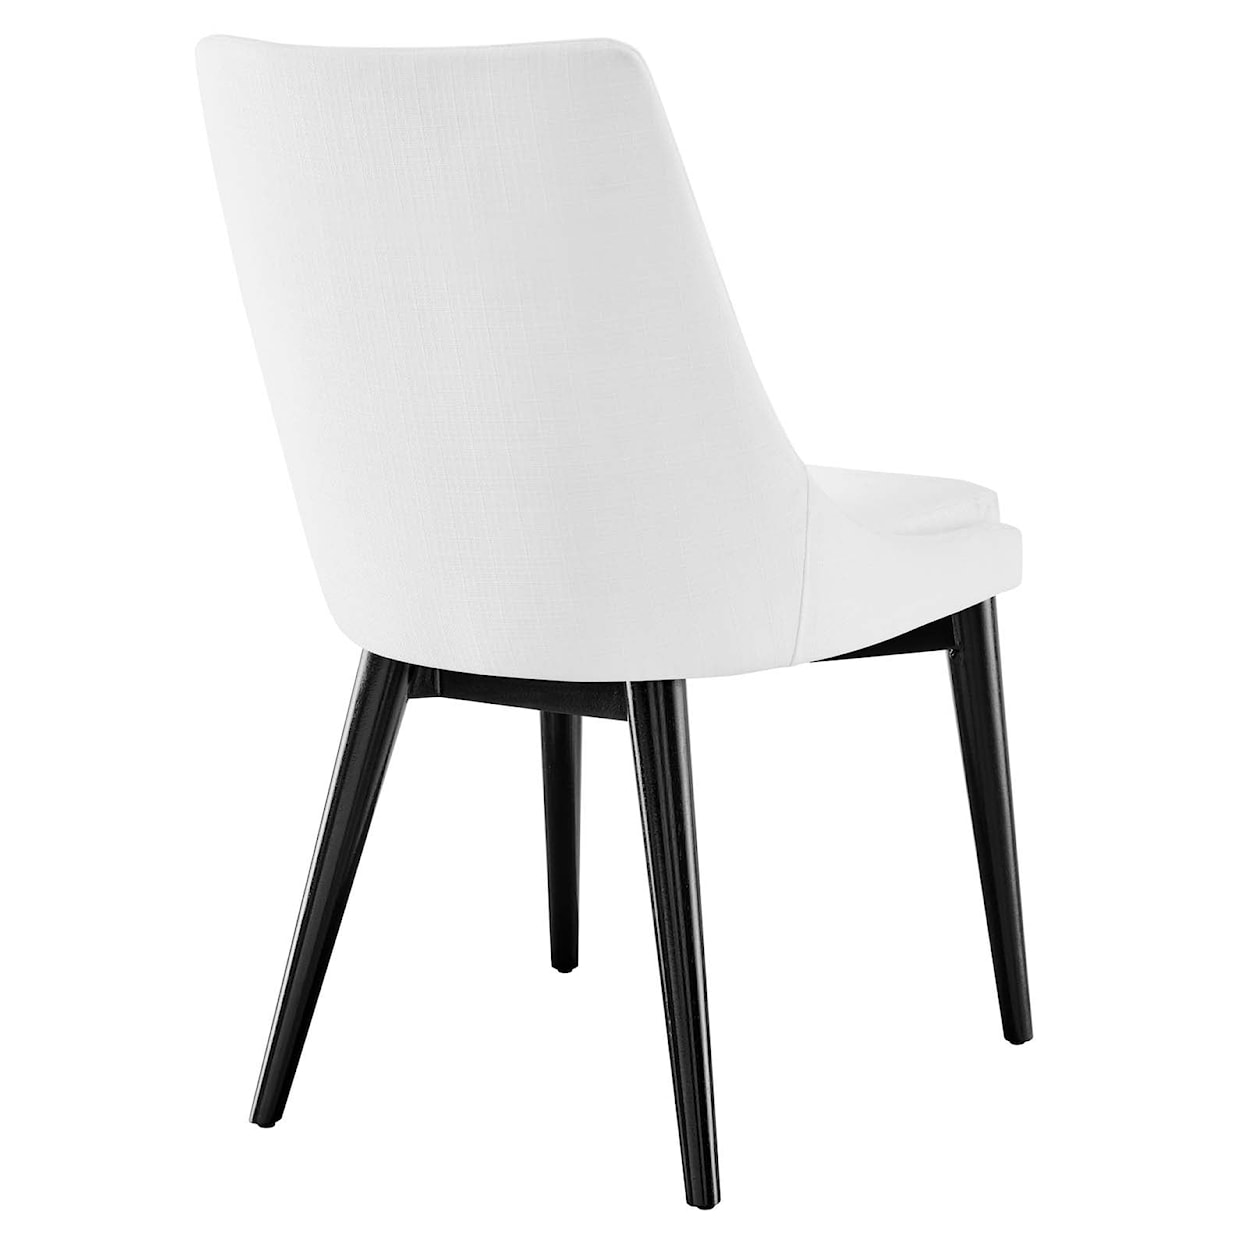 Modway Viscount Viscount Fabric Dining Chair